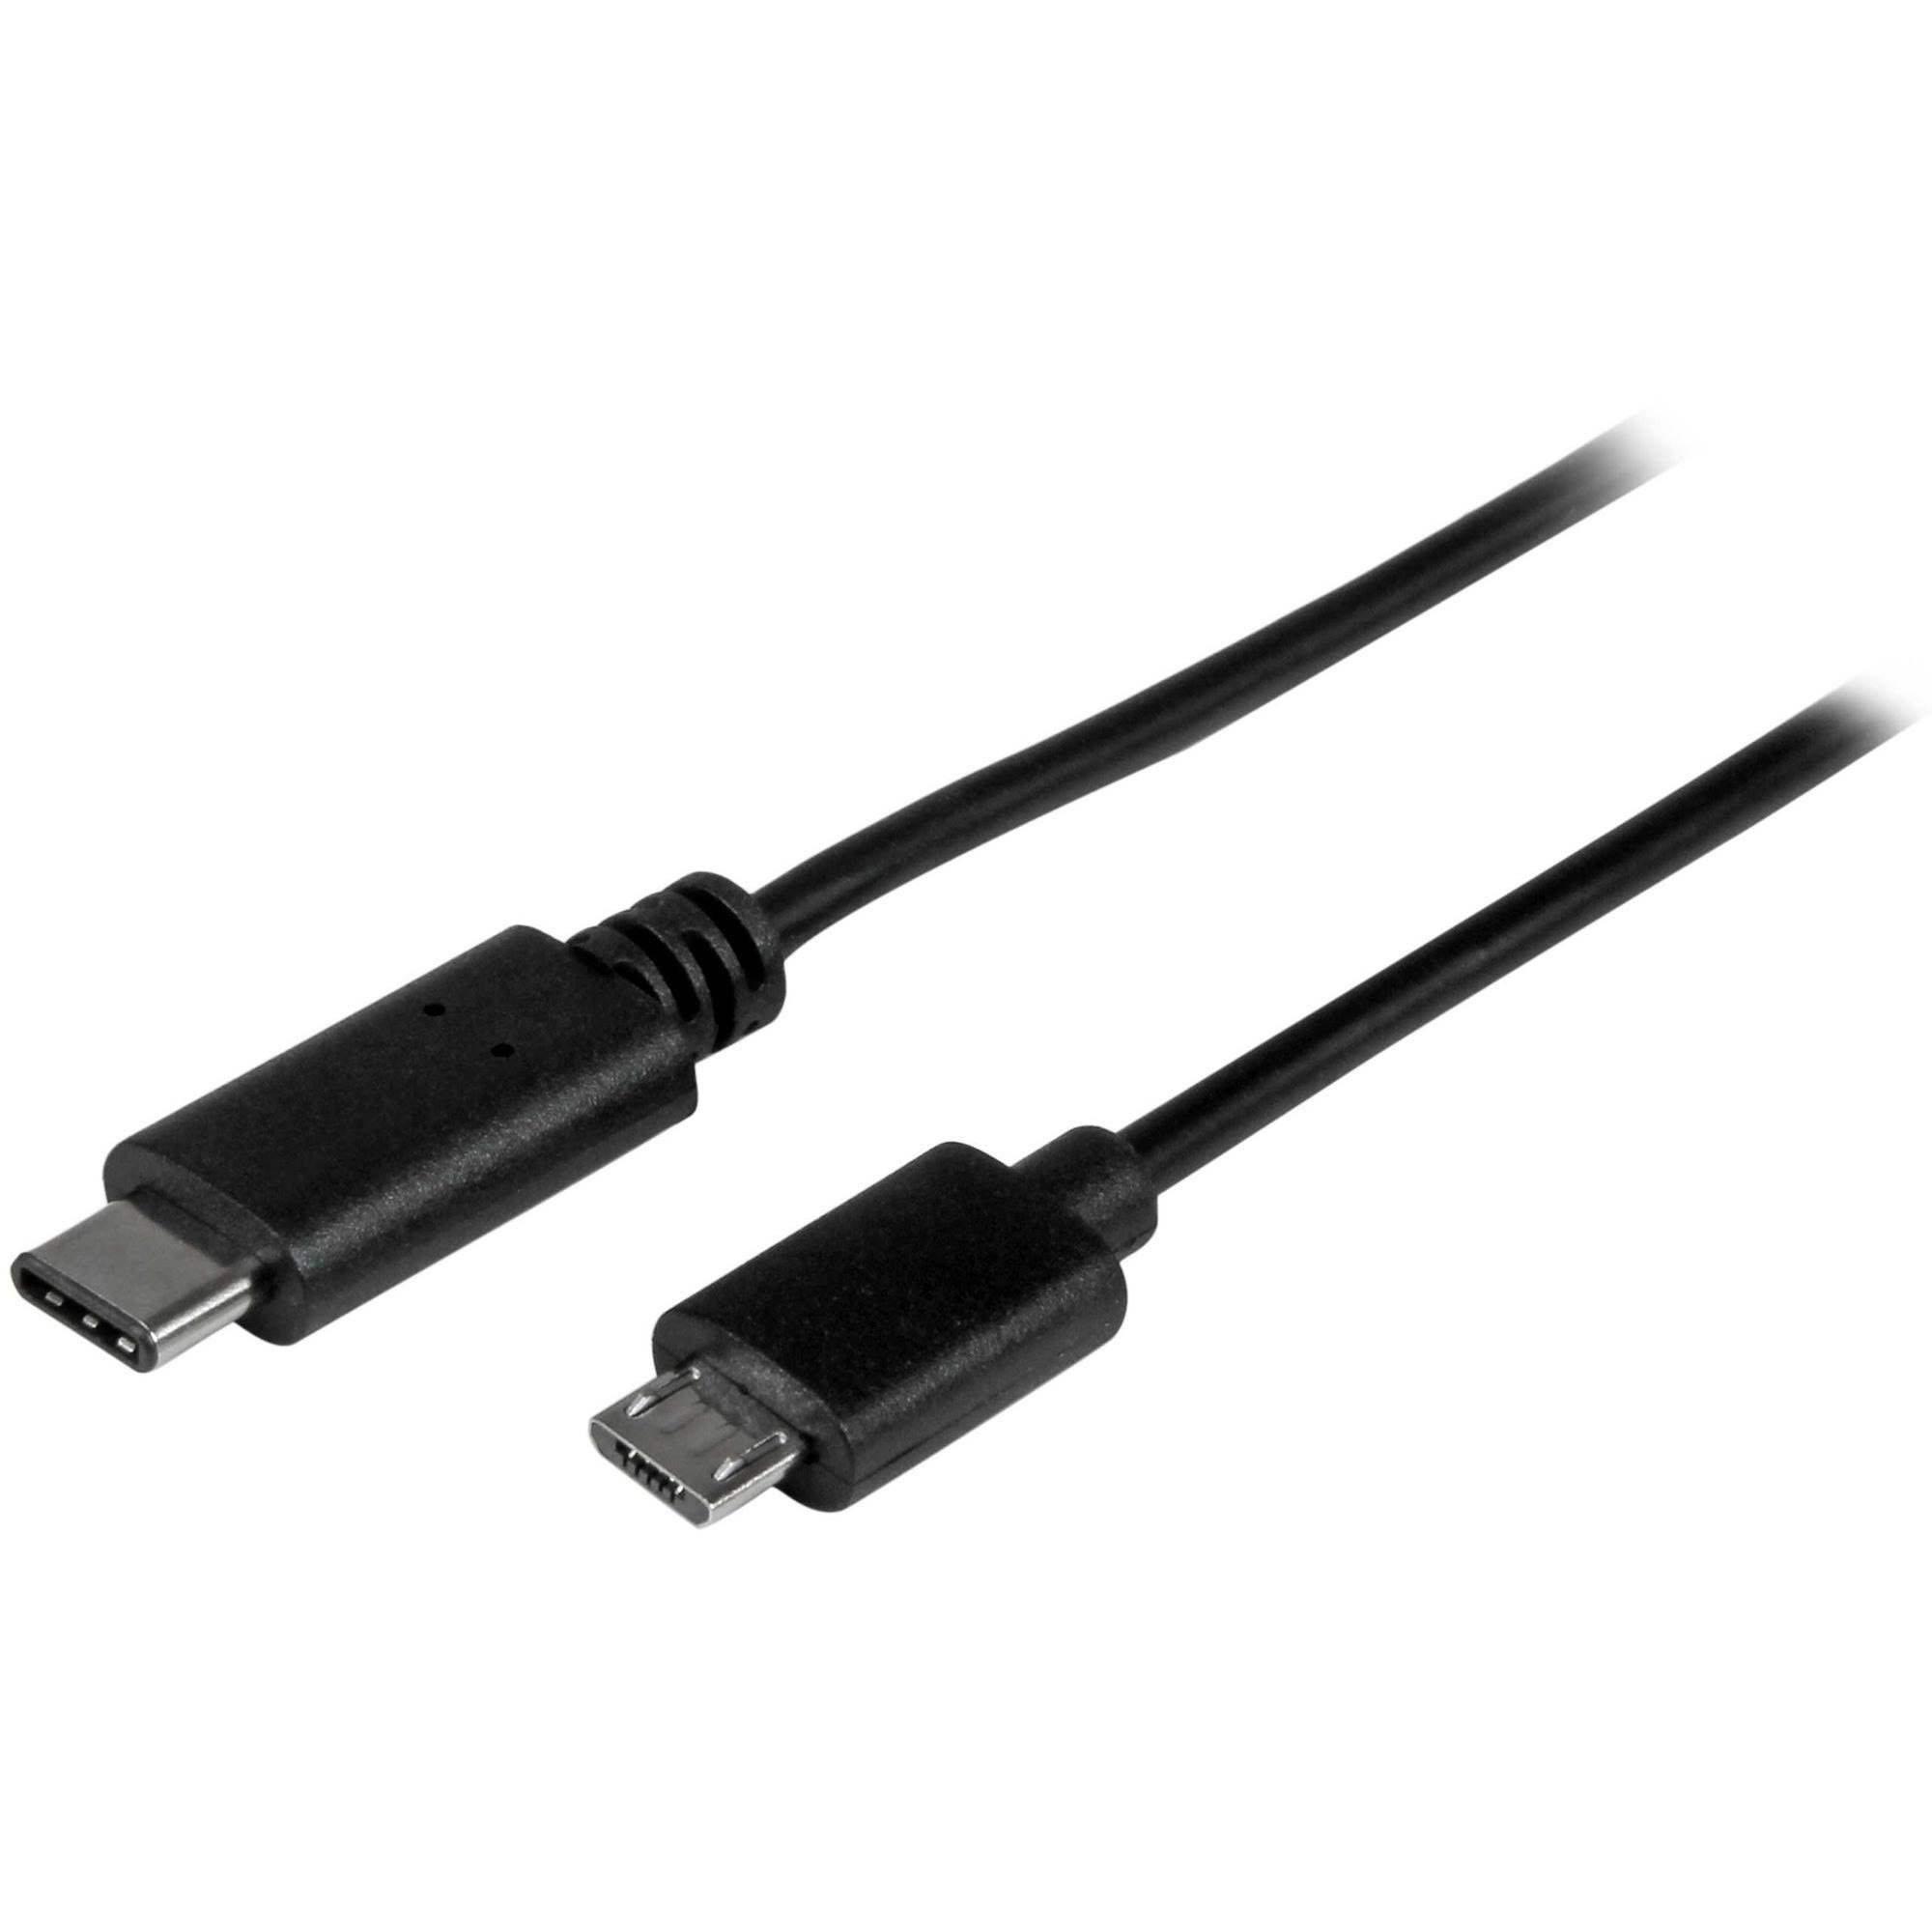 Startech USB 2.0 USB-C to Micro-B Cable, M/M, 0.5m